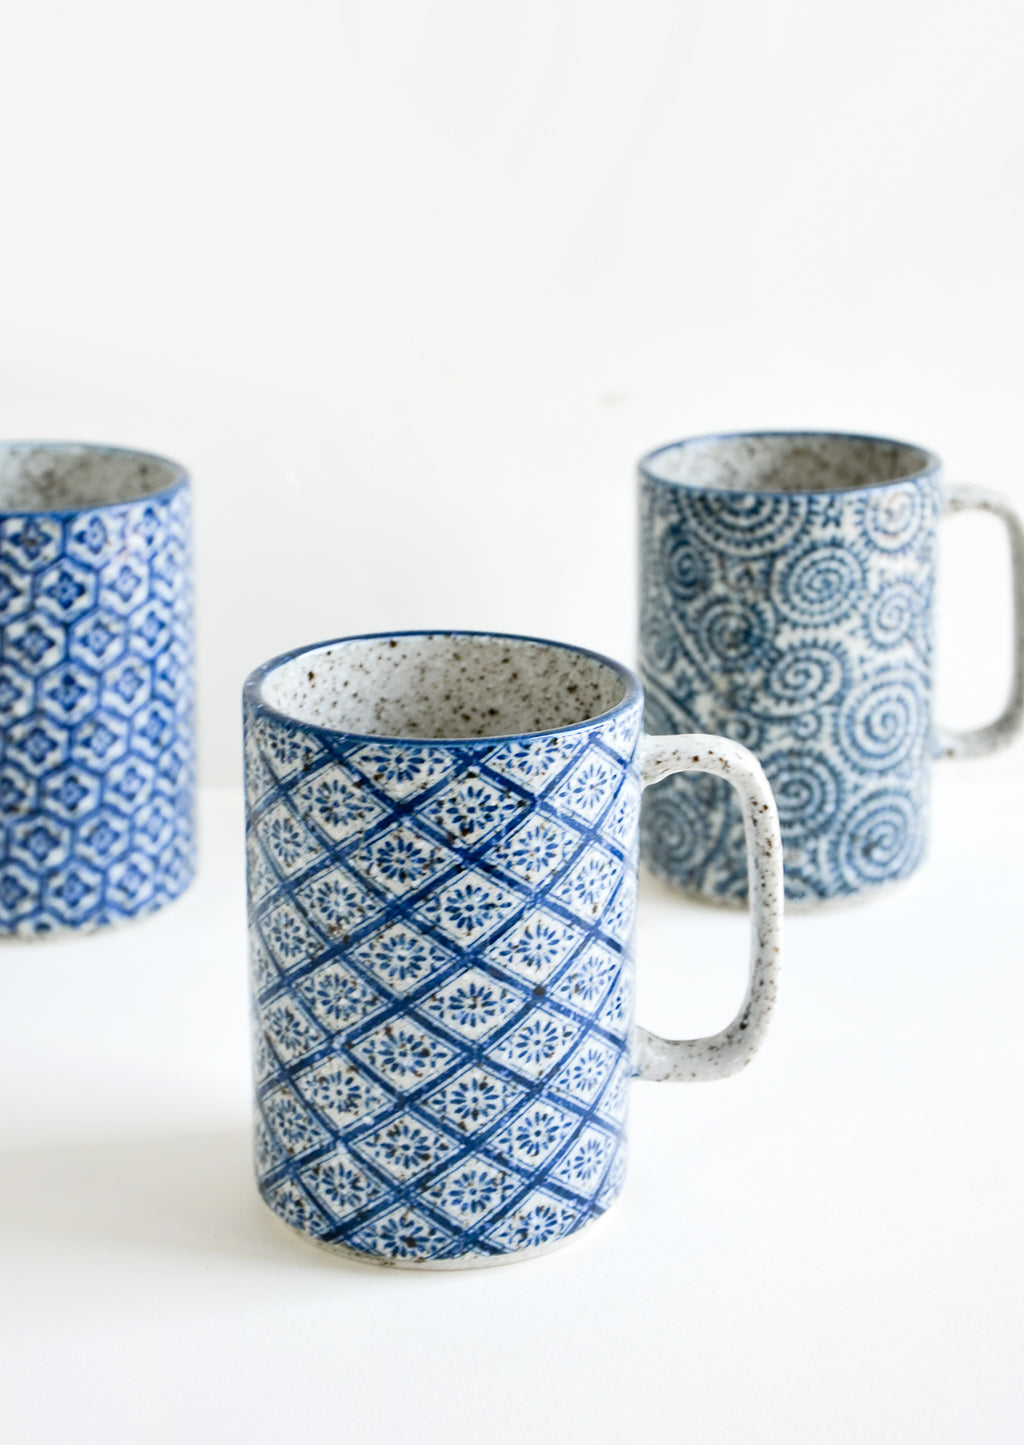 1: Tall ceramic mugs with handles, made from speckled grey ceramic with assorted indigo patterns inspired by Delft pottery.